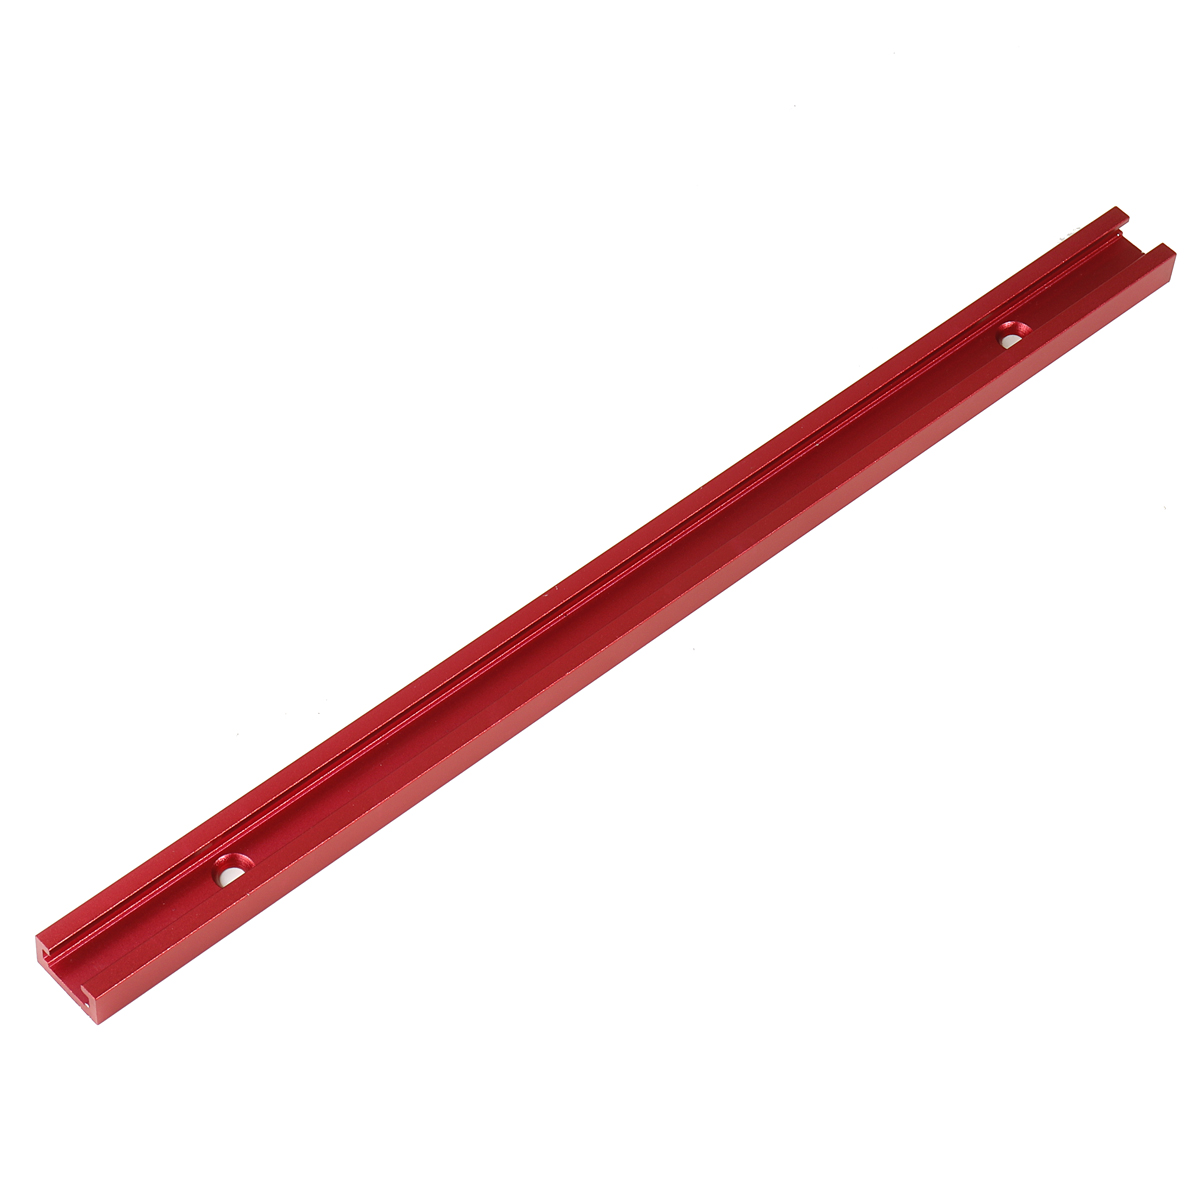 Red-Aluminum-Alloy-300-1220mm-T-track-T-slot-Miter-Track-Jig-T-Screw-Fixture-Slot-19x95mm-For-Table--1682608-2